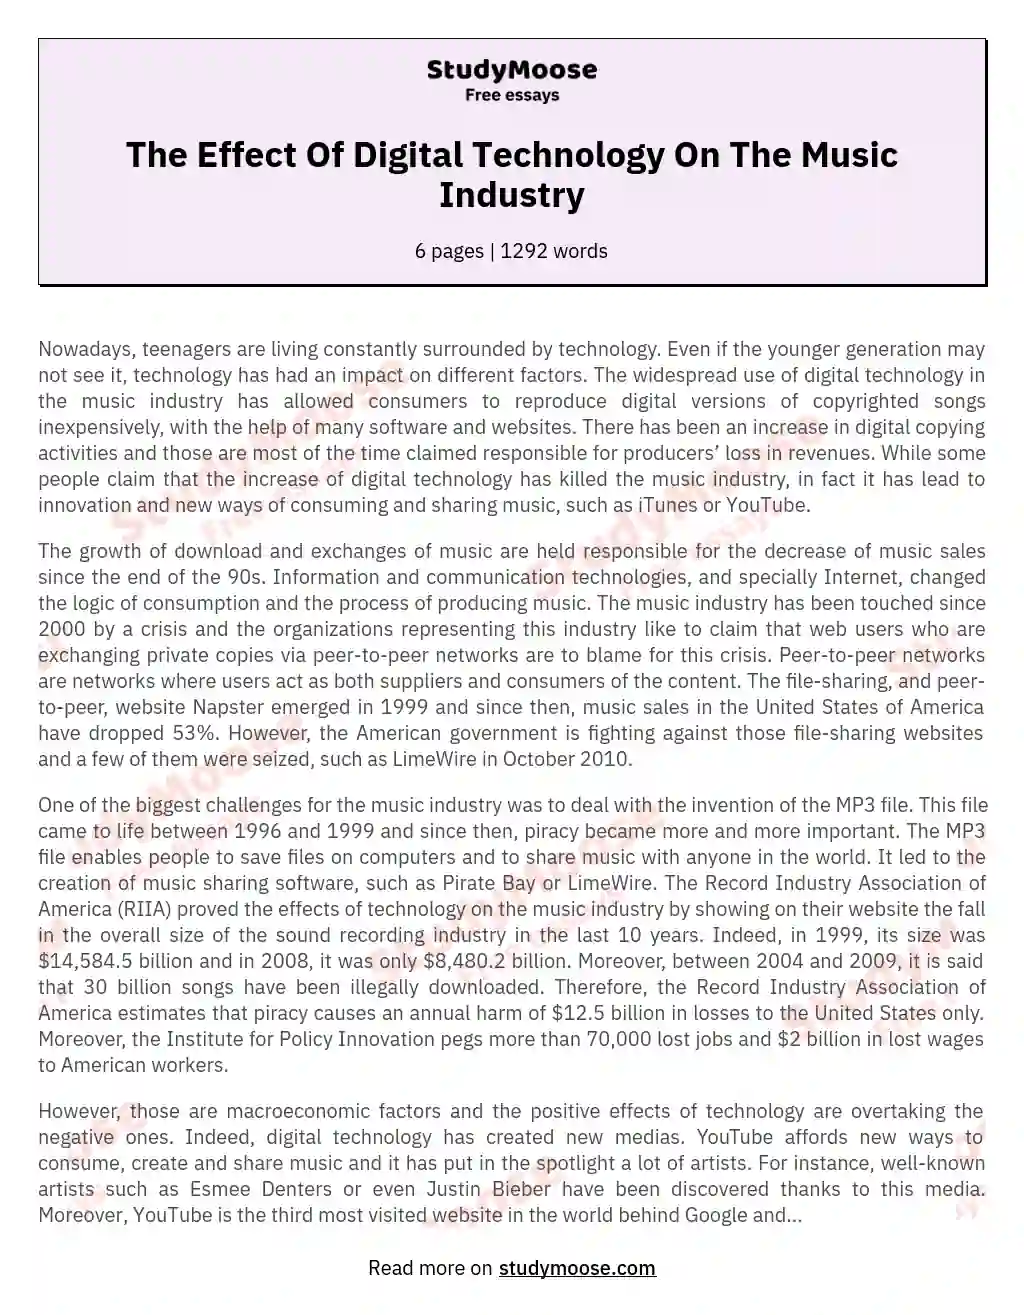 The Effect Of Digital Technology On The Music Industry